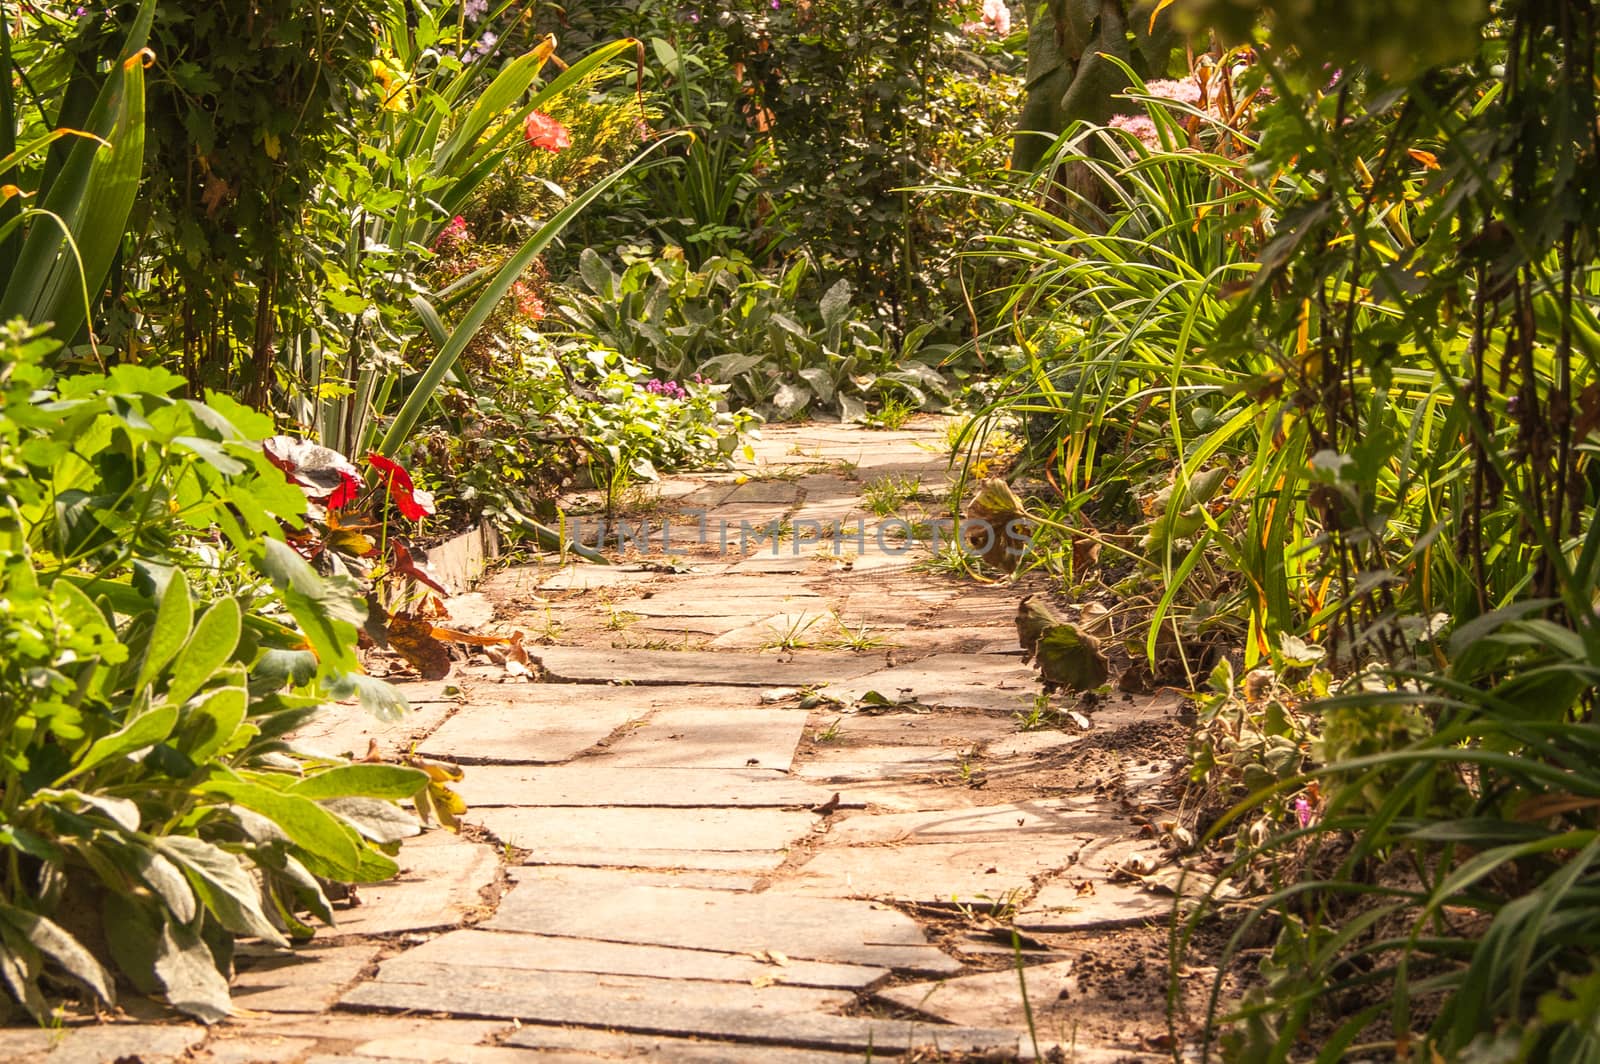 stone path in a garden in the summer, sunny day